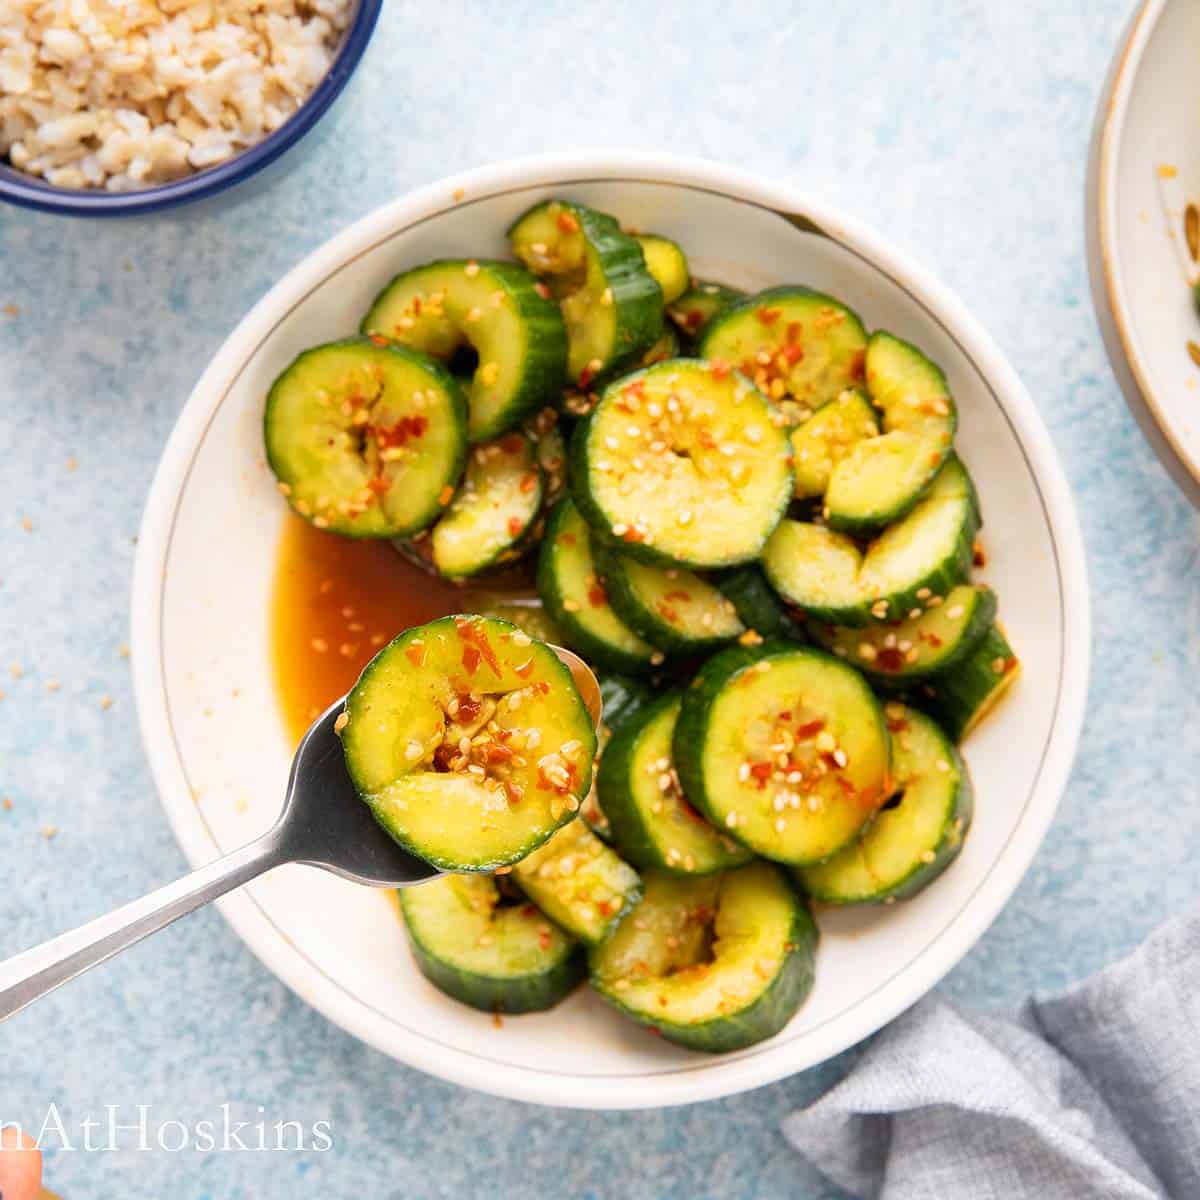 Lifting a Asian marinated cucumber slice with a spoon.